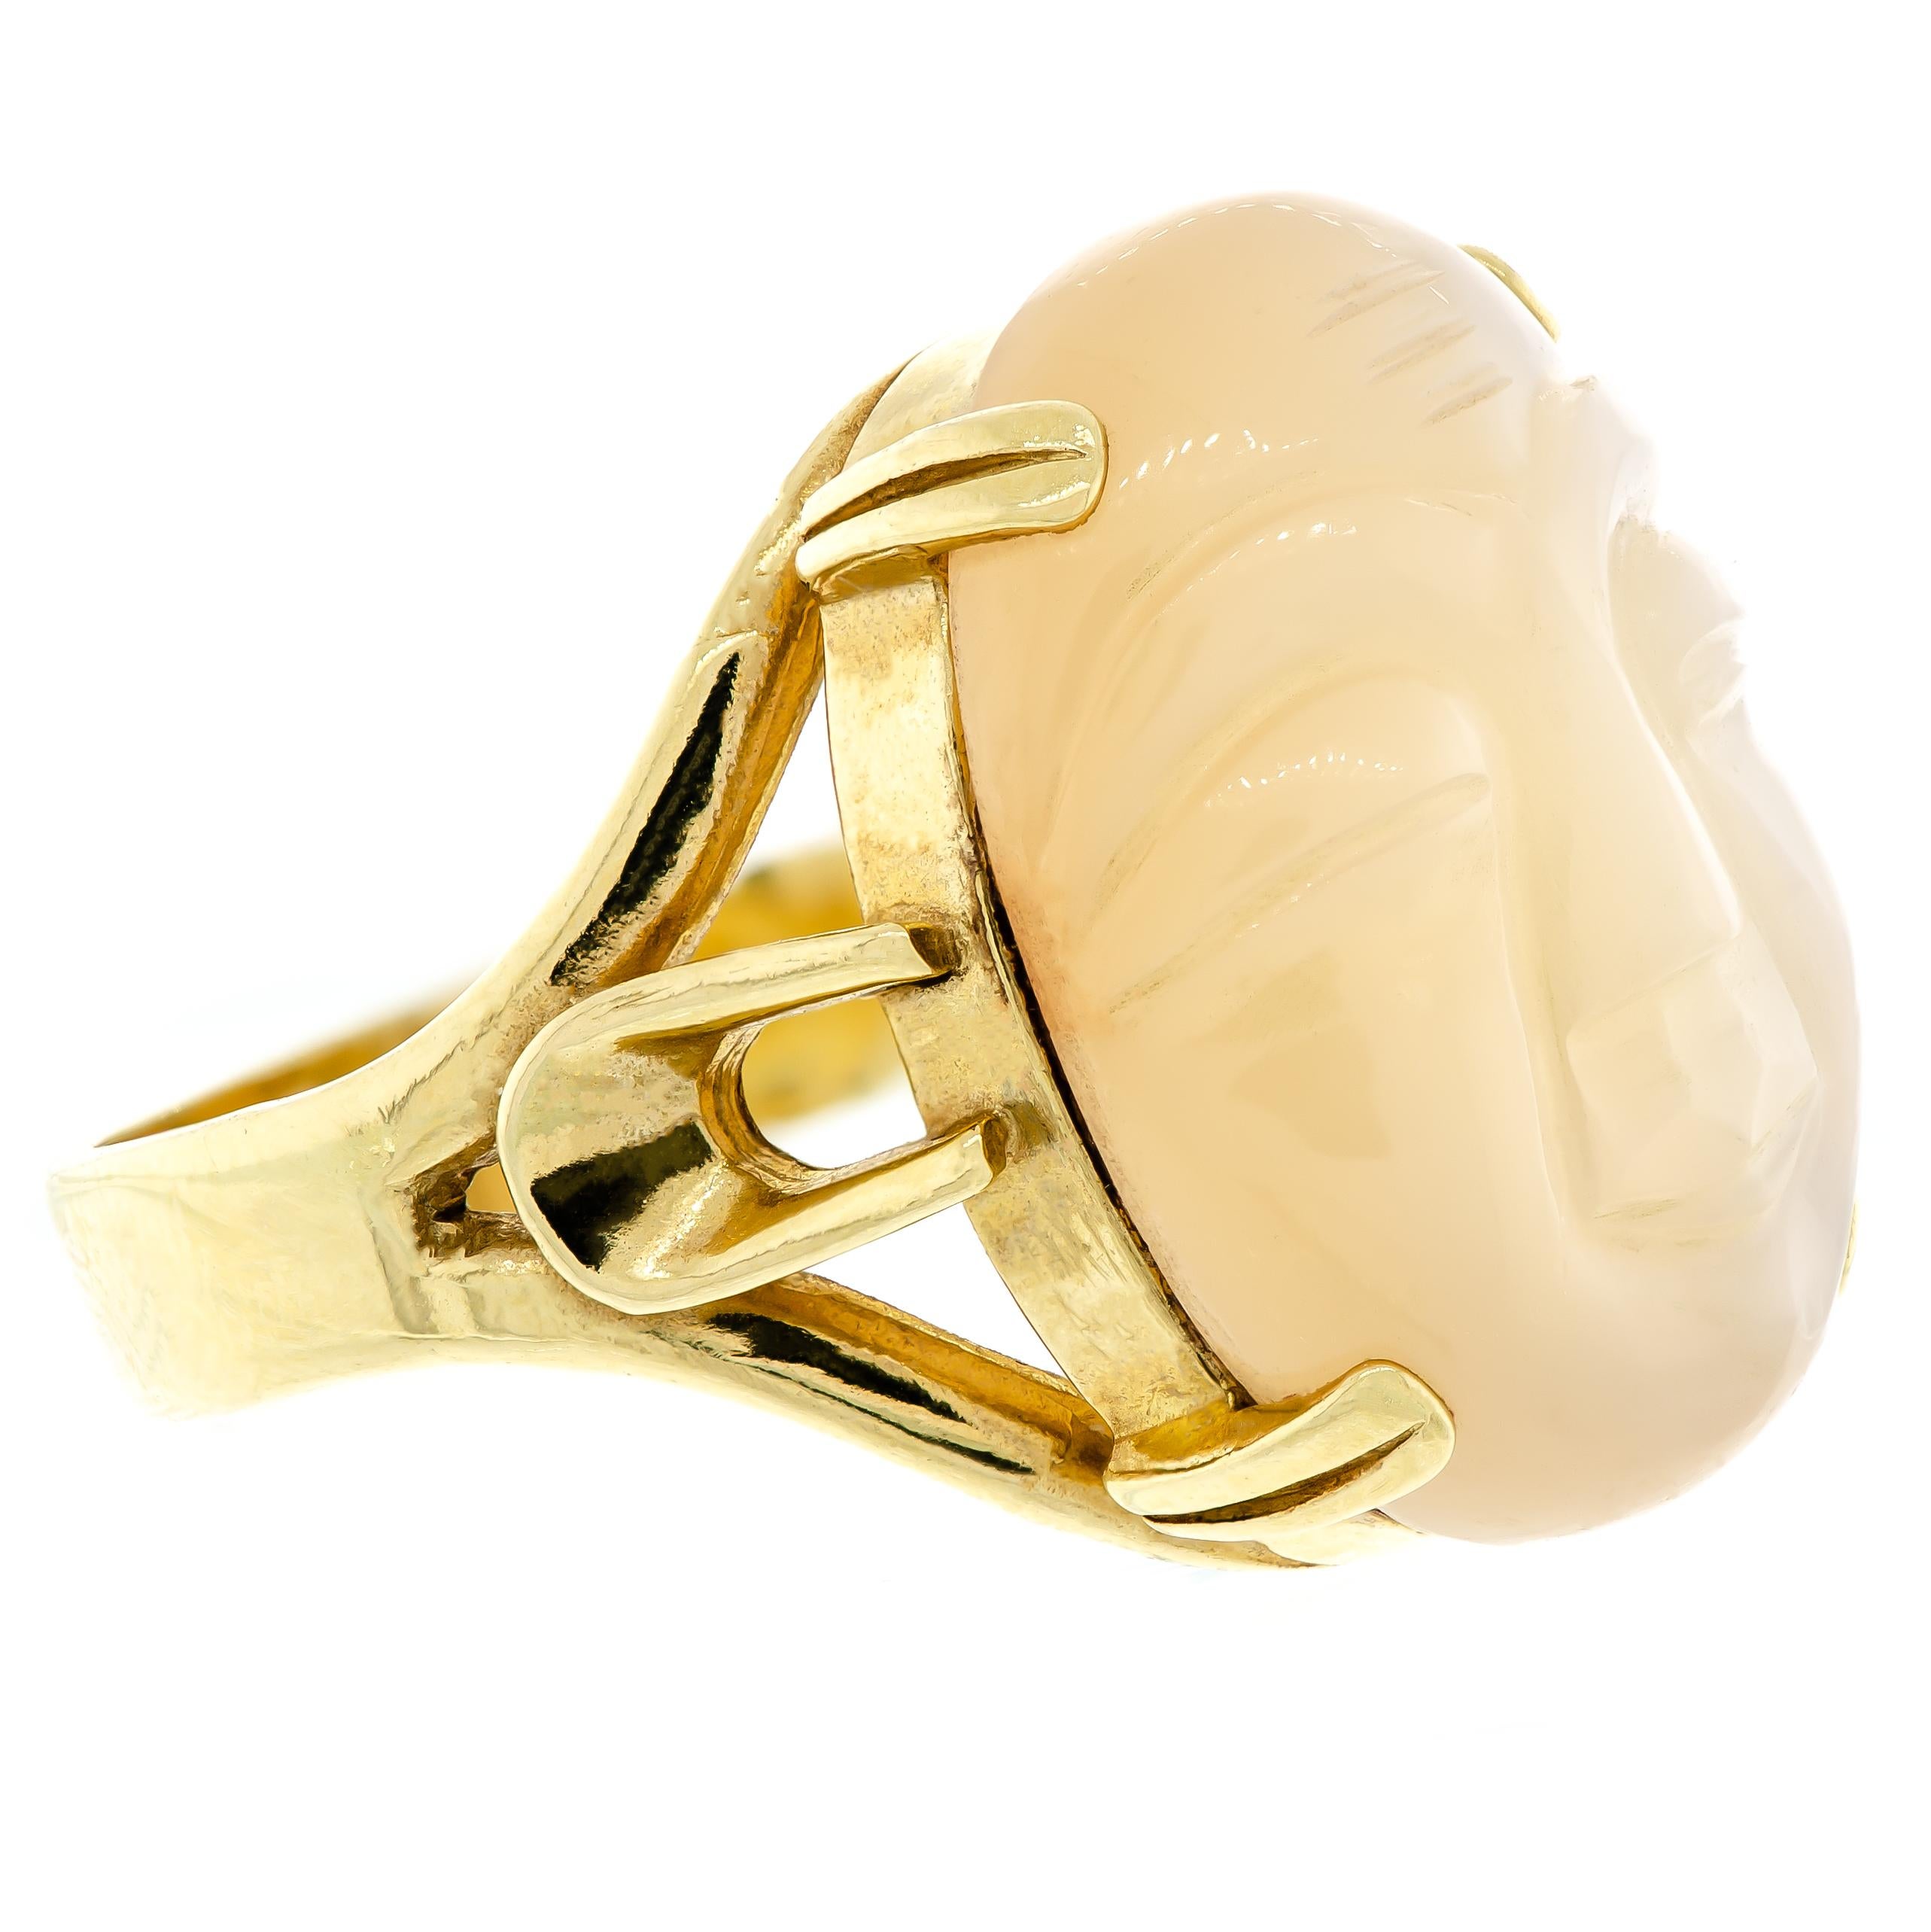 Charming vintage 14 karat yellow gold 'man in the moon' carved Moonstone ring. The oval-shaped stone is finely carved with a delightful smiling man-in-the-moon face. An exquisite ring featuring a handsome design makes this piece is an absolute gem.